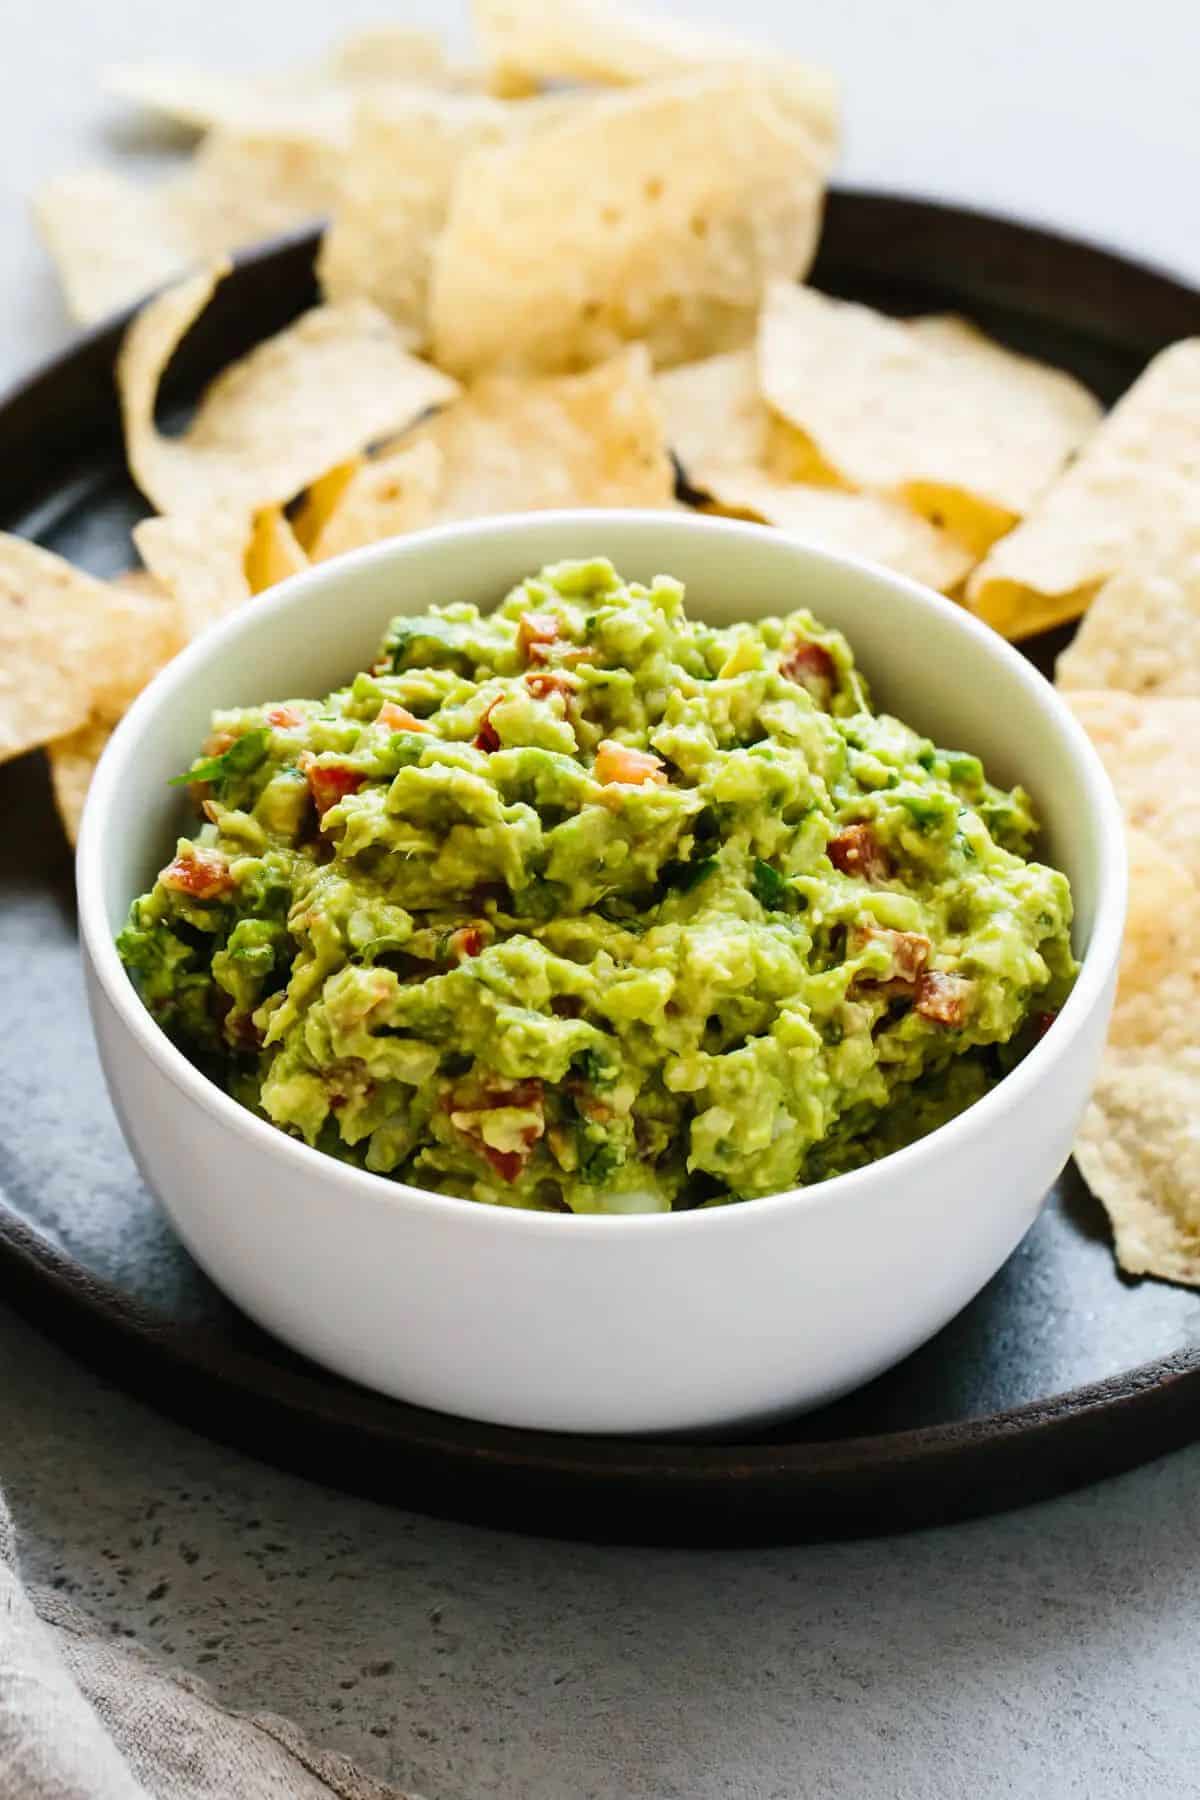 Healthy and fresh guacamole in a white bowl.